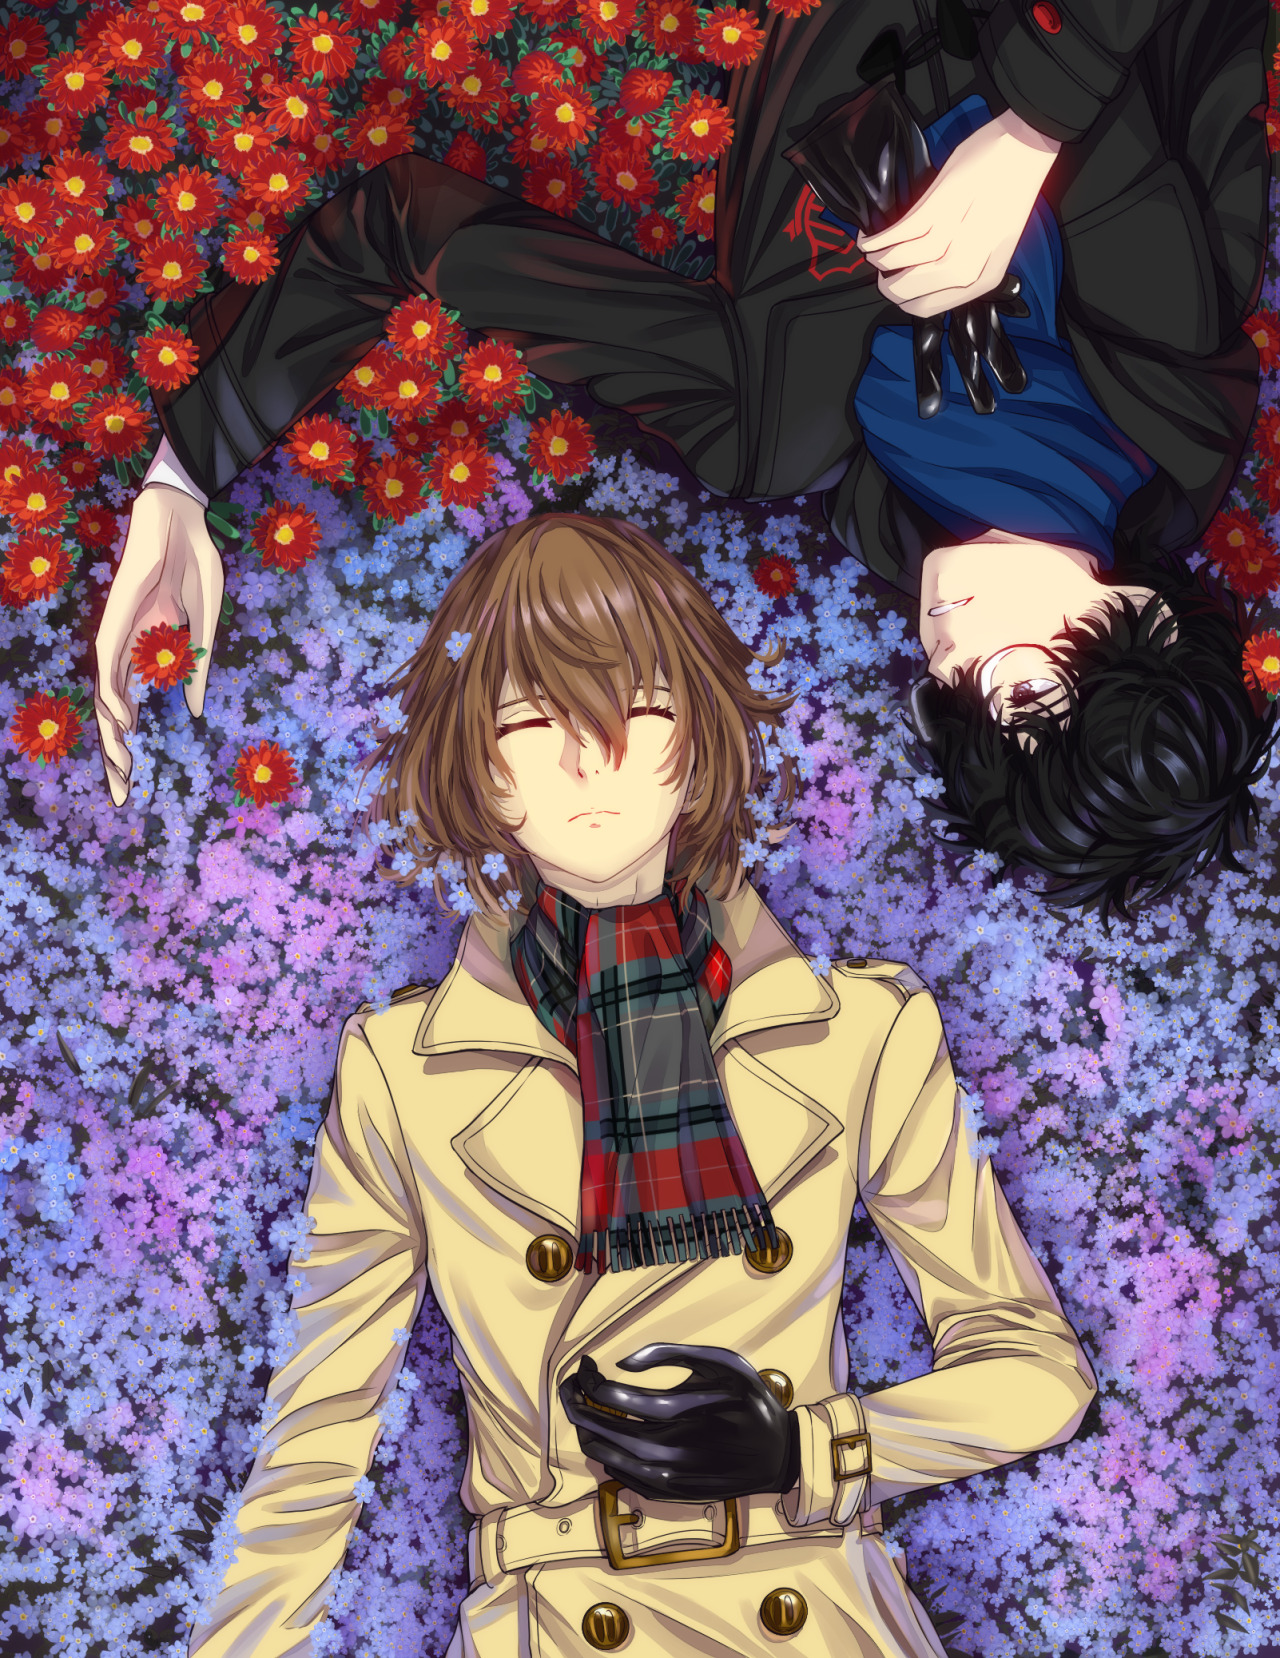 In honor of the Persona 5 Royal anniversary, I redrew that scene from the opening but with their flowers! #persona 5 #persona 5 royal #shuake#akeshu#goro akechi #persona 5 protagonist #akira kurusu#ren amamiya #truthfully i never quite managed to draw something for an anniversary #so #i draw pretty flowers and nice leather gloves! and a sleeping boy! SLEEPING #my art